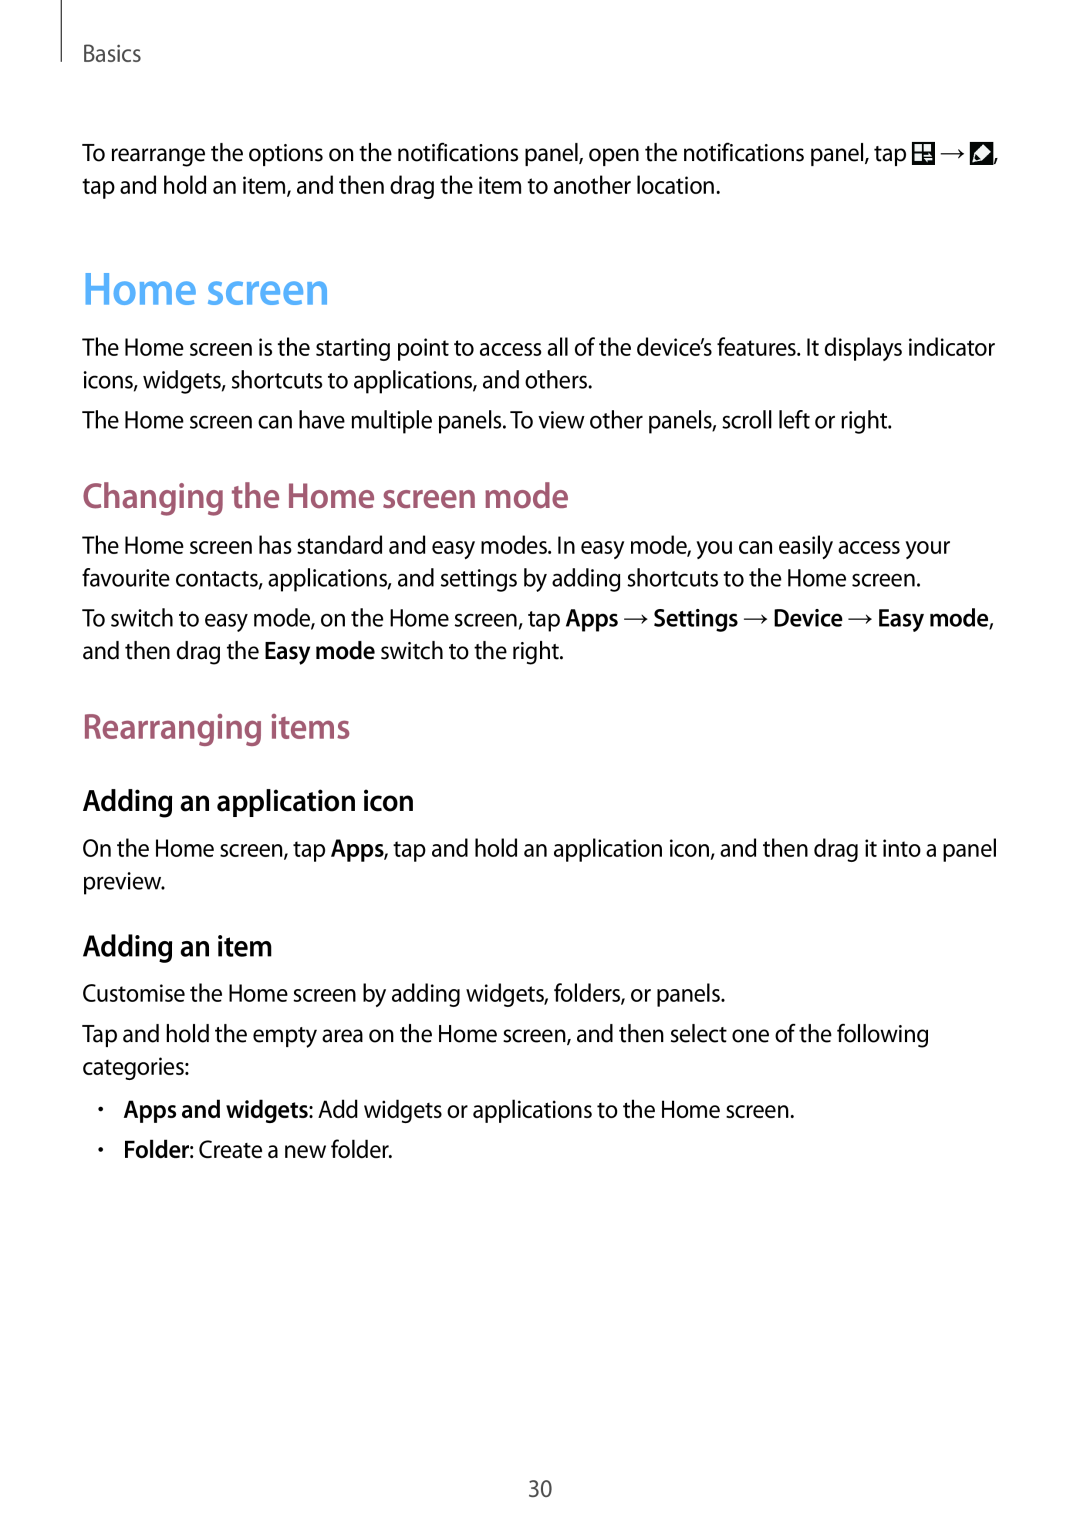 Samsung GT-I9305RWDOMN Changing the Home screen mode, Rearranging items, Adding an application icon, Adding an item 